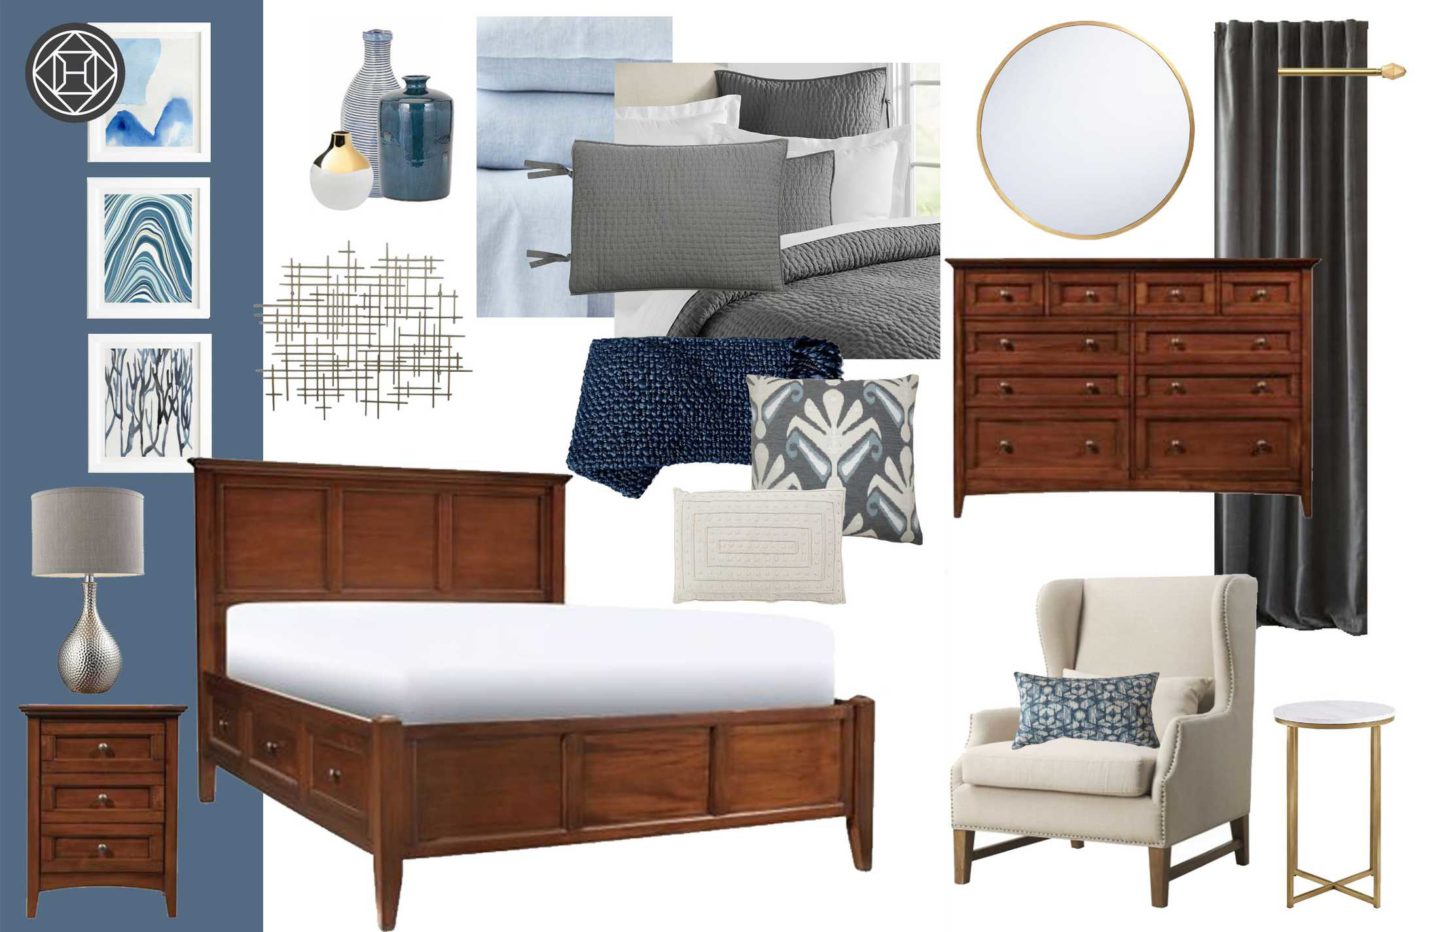 Our Master Bedroom with Havenly | What's For Dinner Esq.